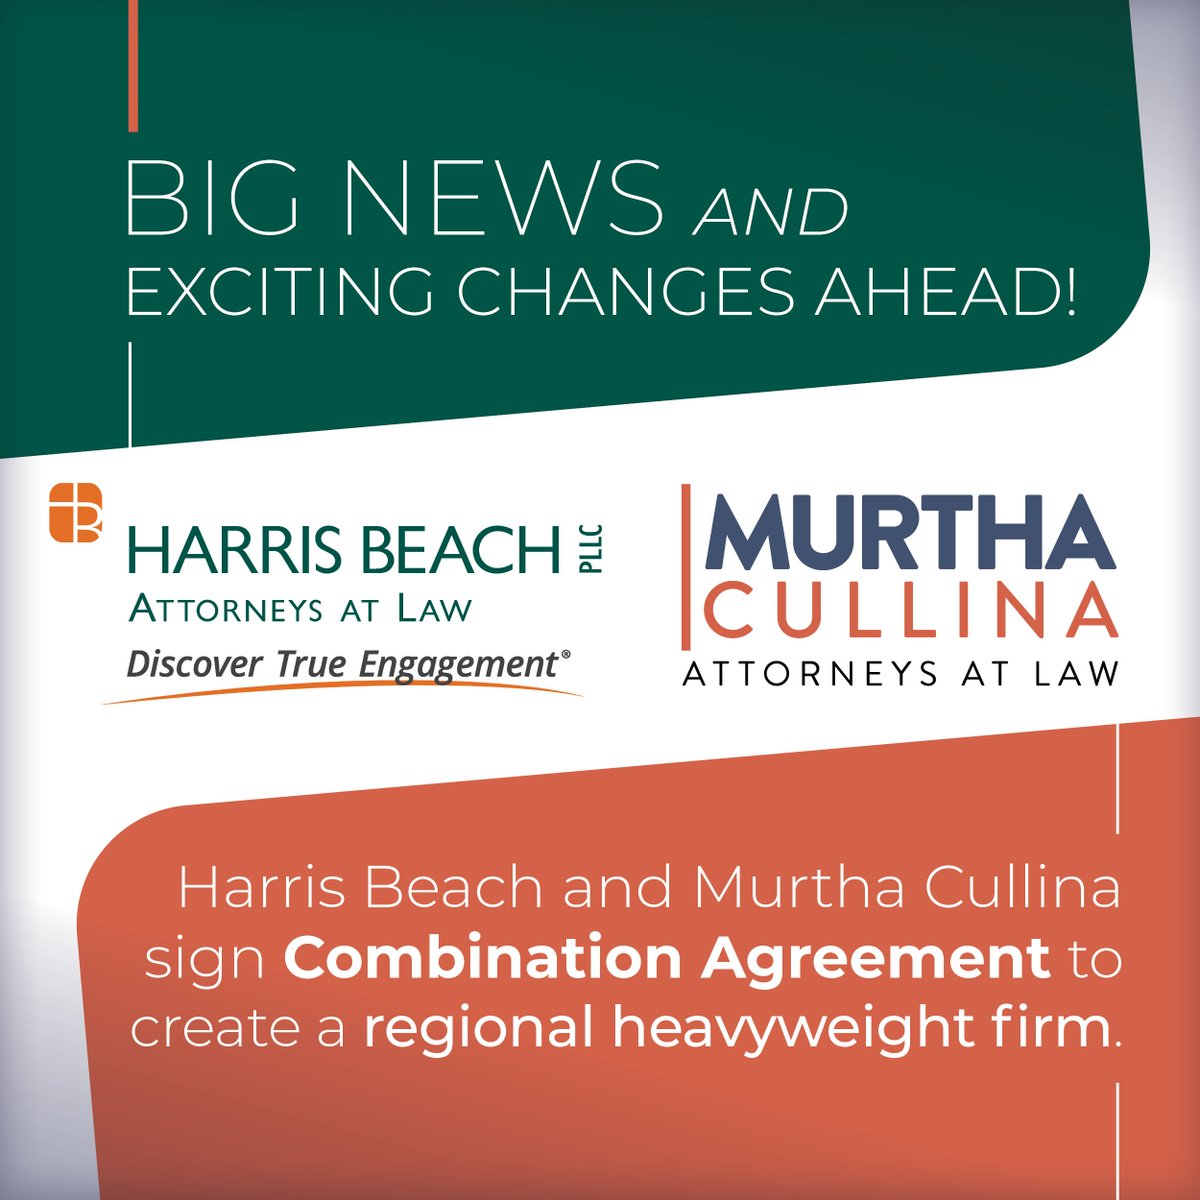 Harris Beach and @MurthaLaw are combining! A Combination Agreement is signed, and we are well on our way to being one firm - known as Harris Beach Murtha. We expect to be one firm by Jan. 1, 2025. Stay tuned for updates! Read more: bit.ly/4a5NpSR